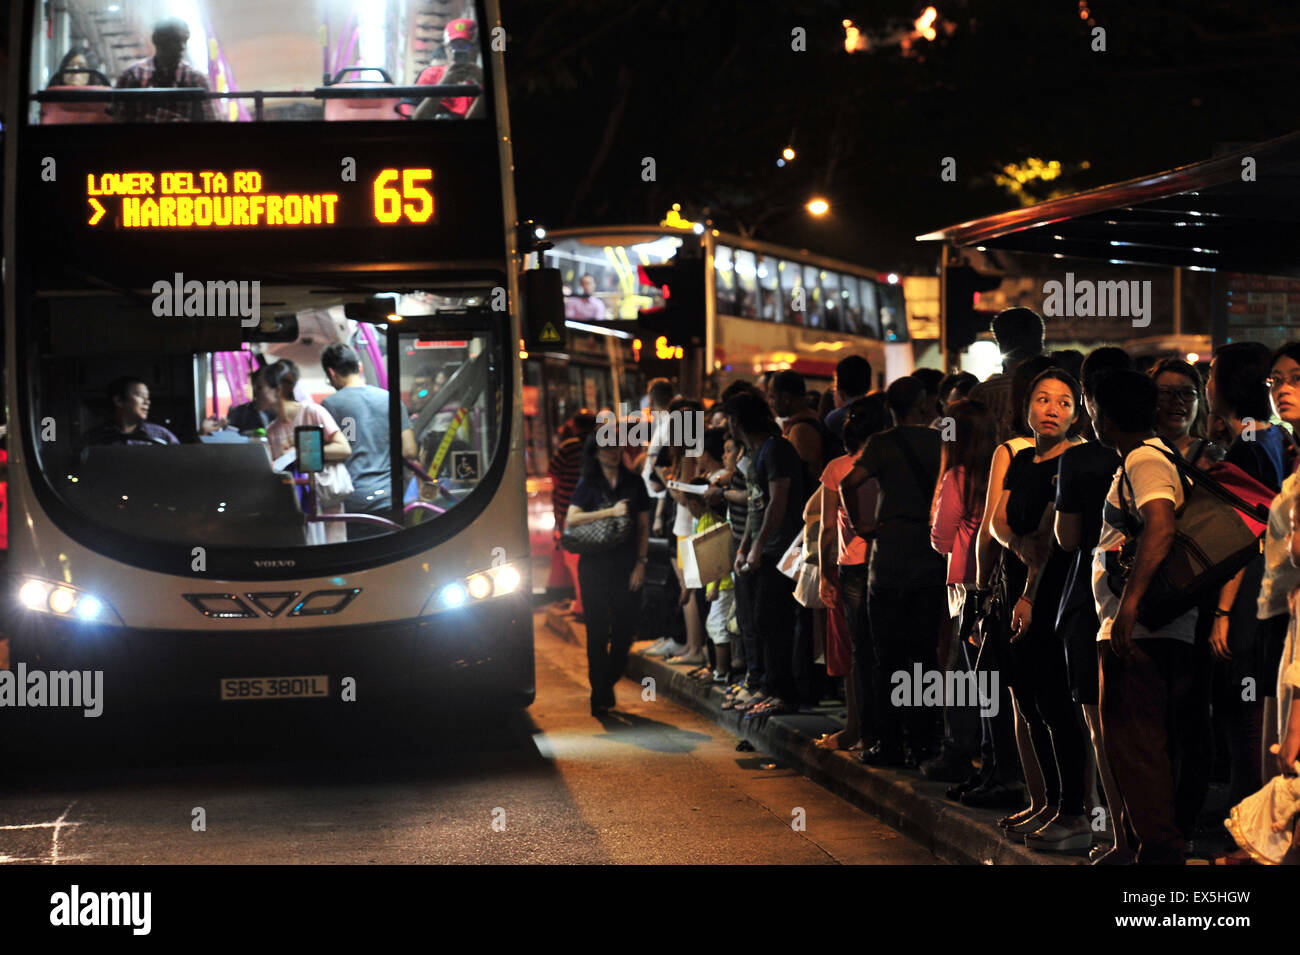 Singapore. 7th July, 2015. People gather to wait for alternative public transport outside a bus stop near Singapore's Dhoby Ghaut MRT Station on July 7, 2015. Train services on Singapore's North-South and East-West MRT Lines were disrupted at evening peak hours due to electrical malfunction on Tuesday, the second time after the East-West MRT Line malfunction in March. © Then Chih Wey/Xinhua/Alamy Live News Stock Photo